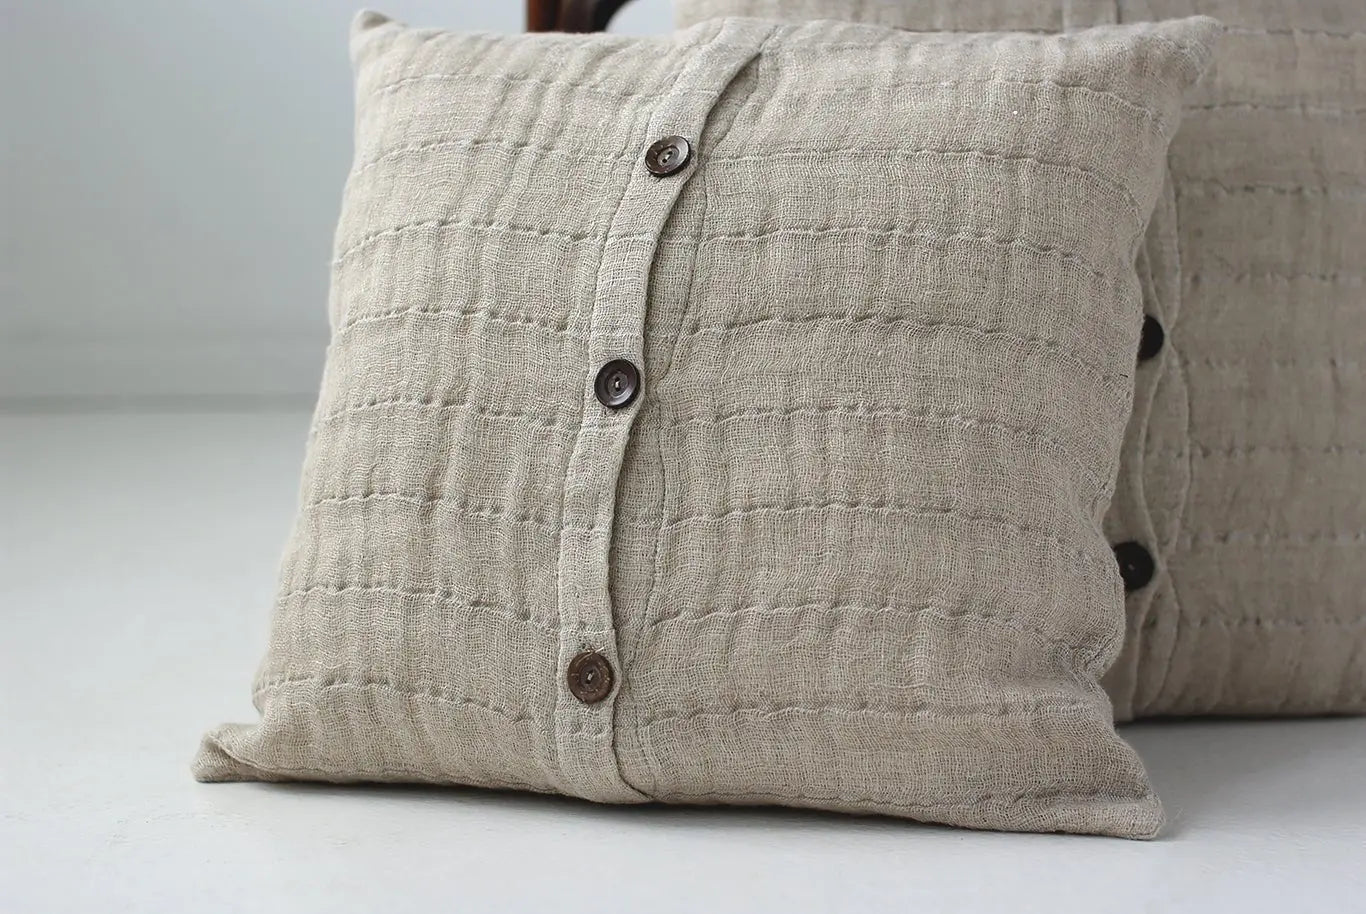 Plisse Linen Throw Pillow with Coconut Buttons, Three Layer Linen - Epic Linen luxury linen